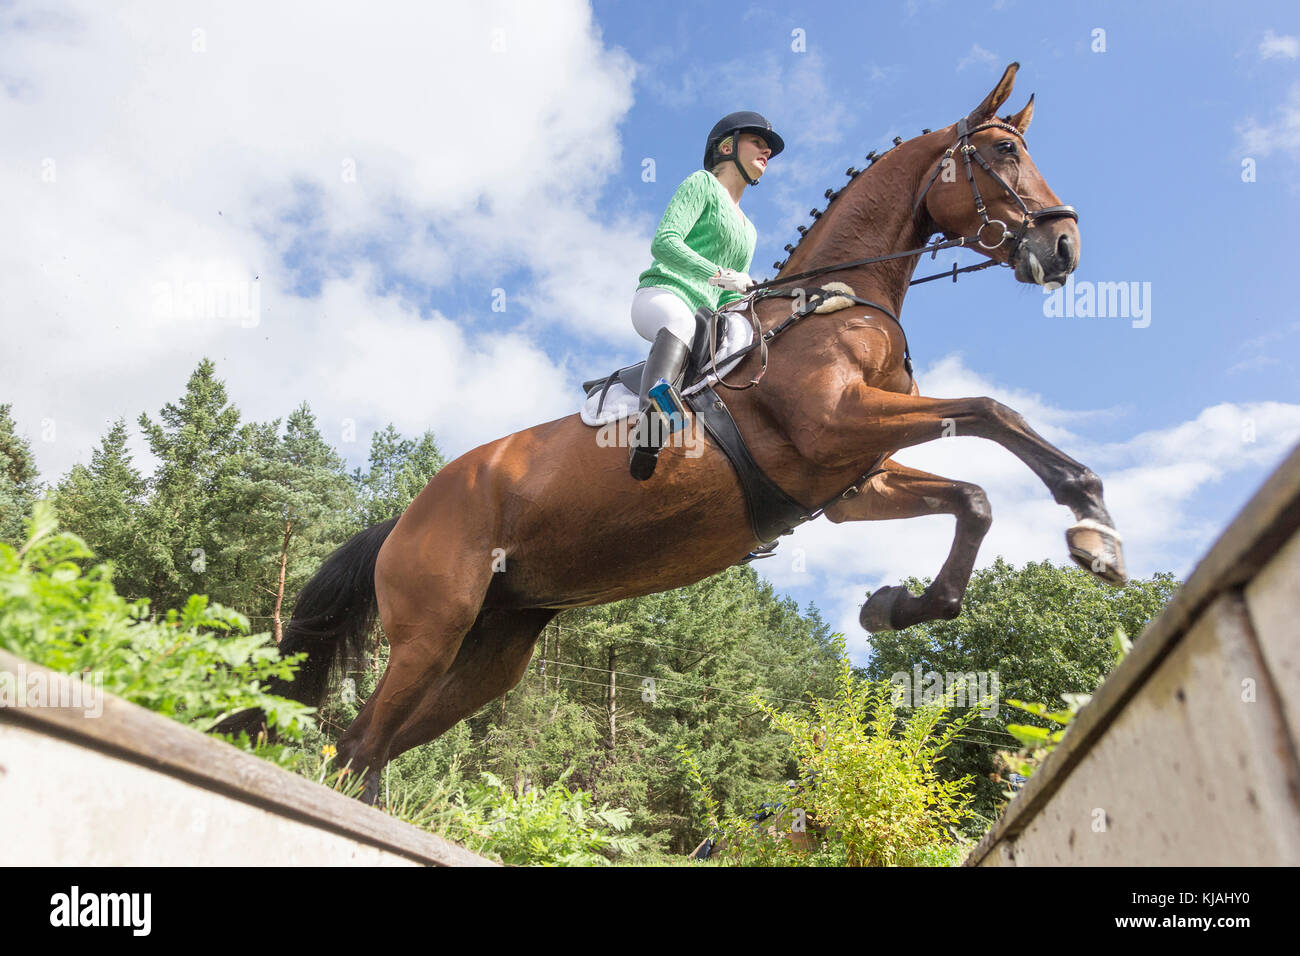 Hanoverian Horse. Rider clearing an obstacle during a cross-country ride, seen from below. Germany Stock Photo